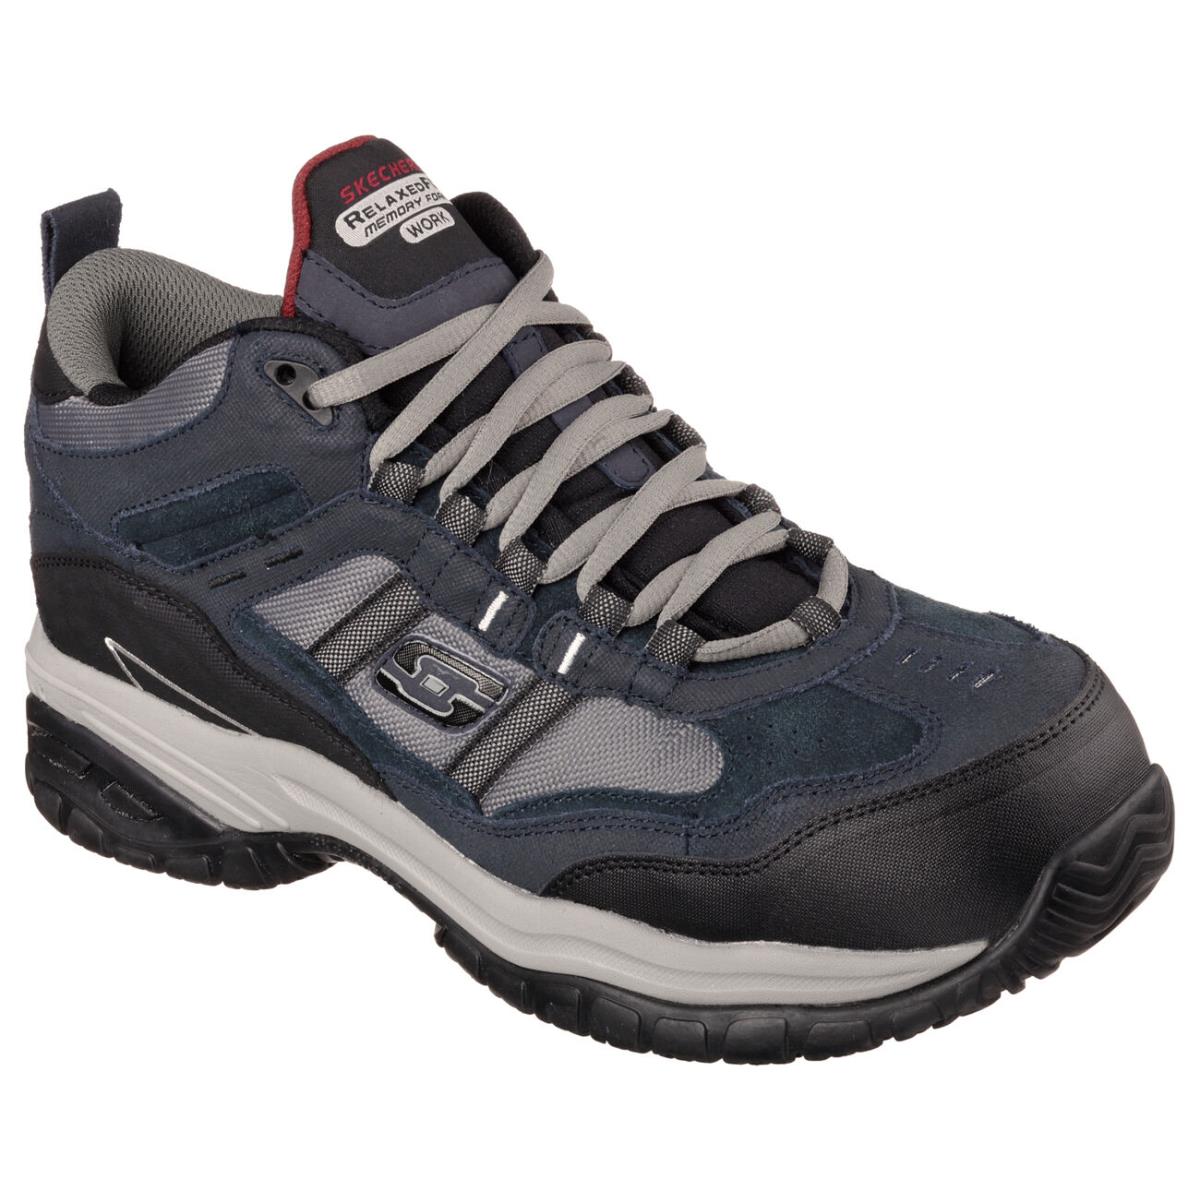 Men`s Skechers Work: Relaxed Fit Soft Stride - Canopy Com 77027 Nvgy Size 8 - Navy/Gray